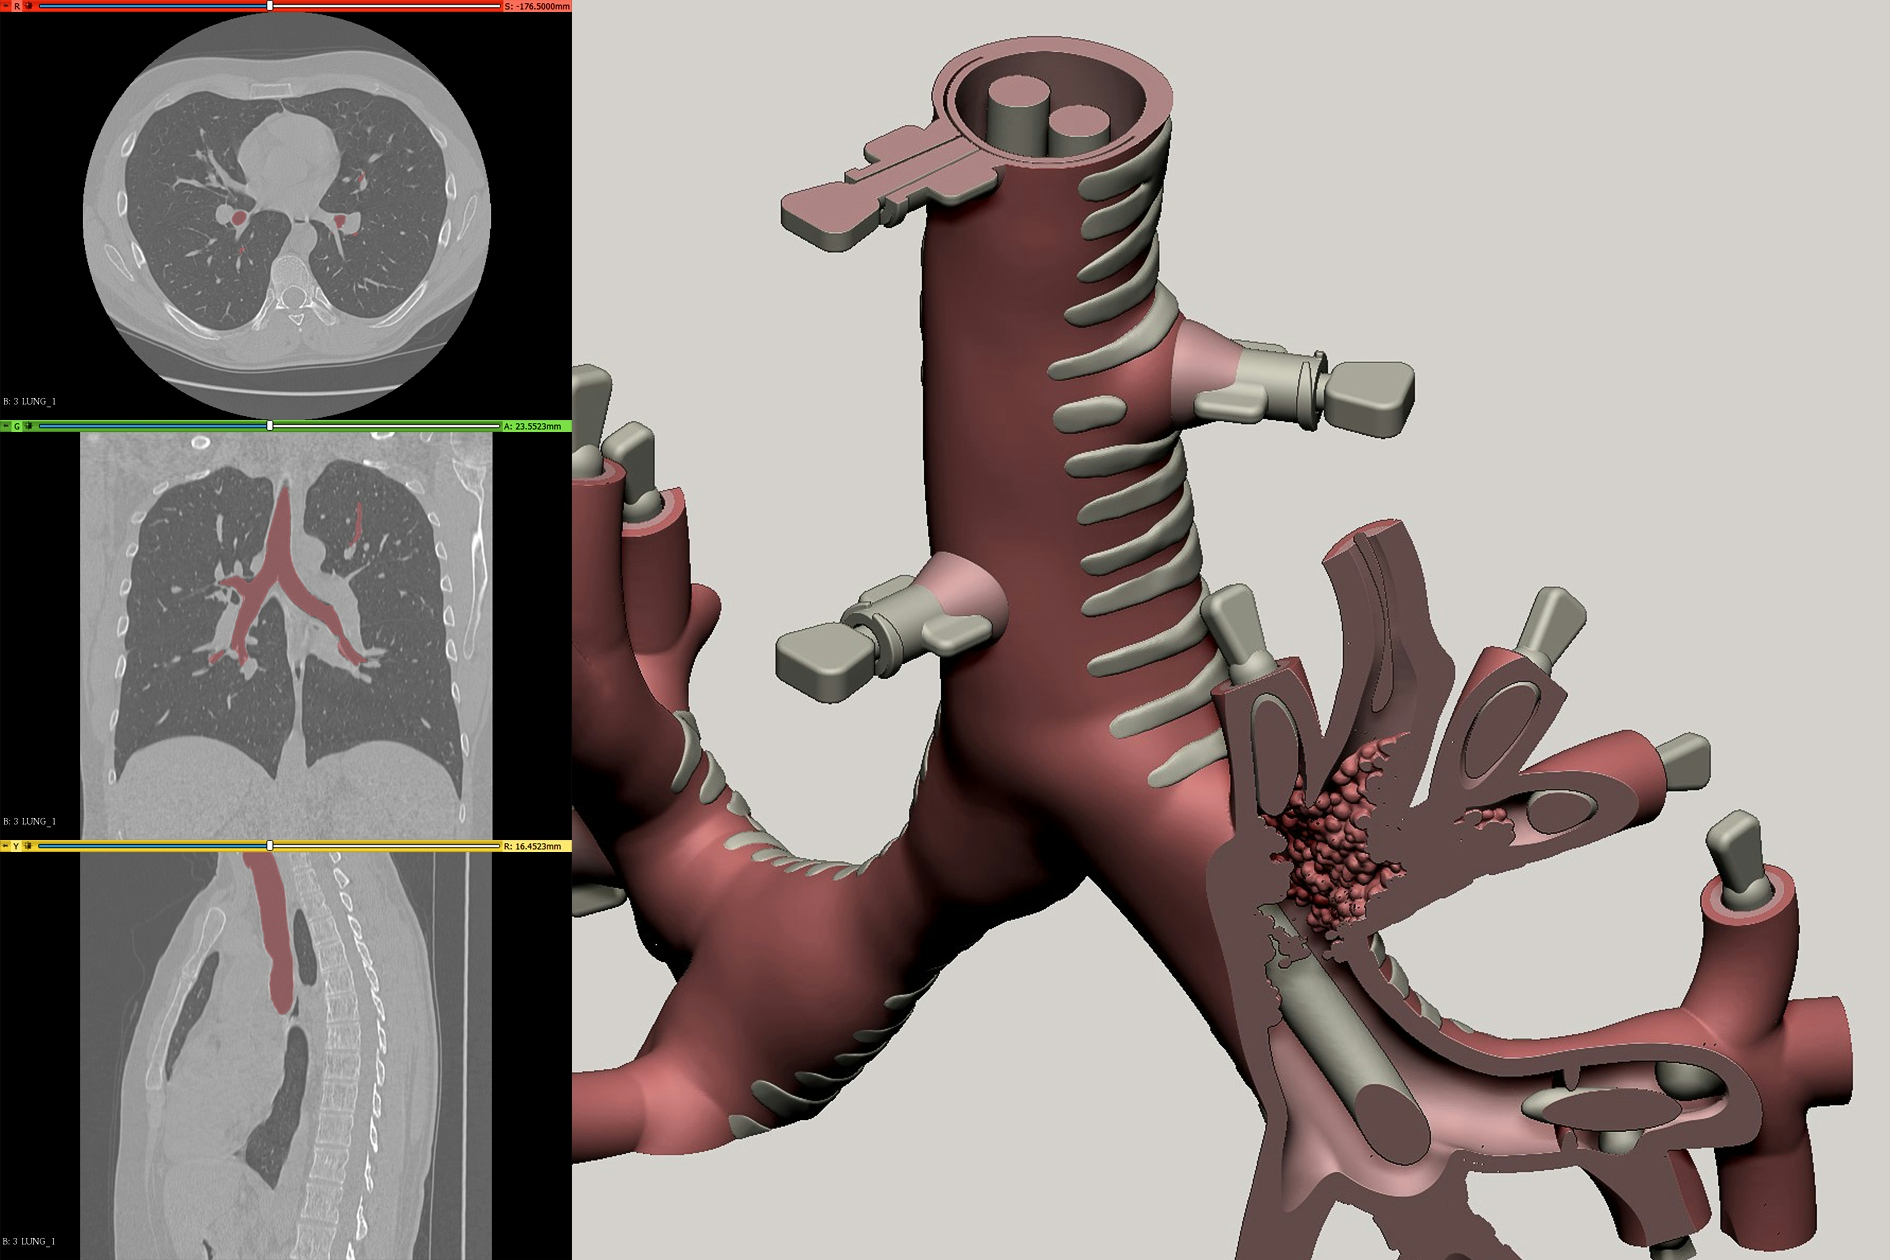 Patient scan data with trachea segmented. Section view of trachea 3D model revealing internal pathology and stents.